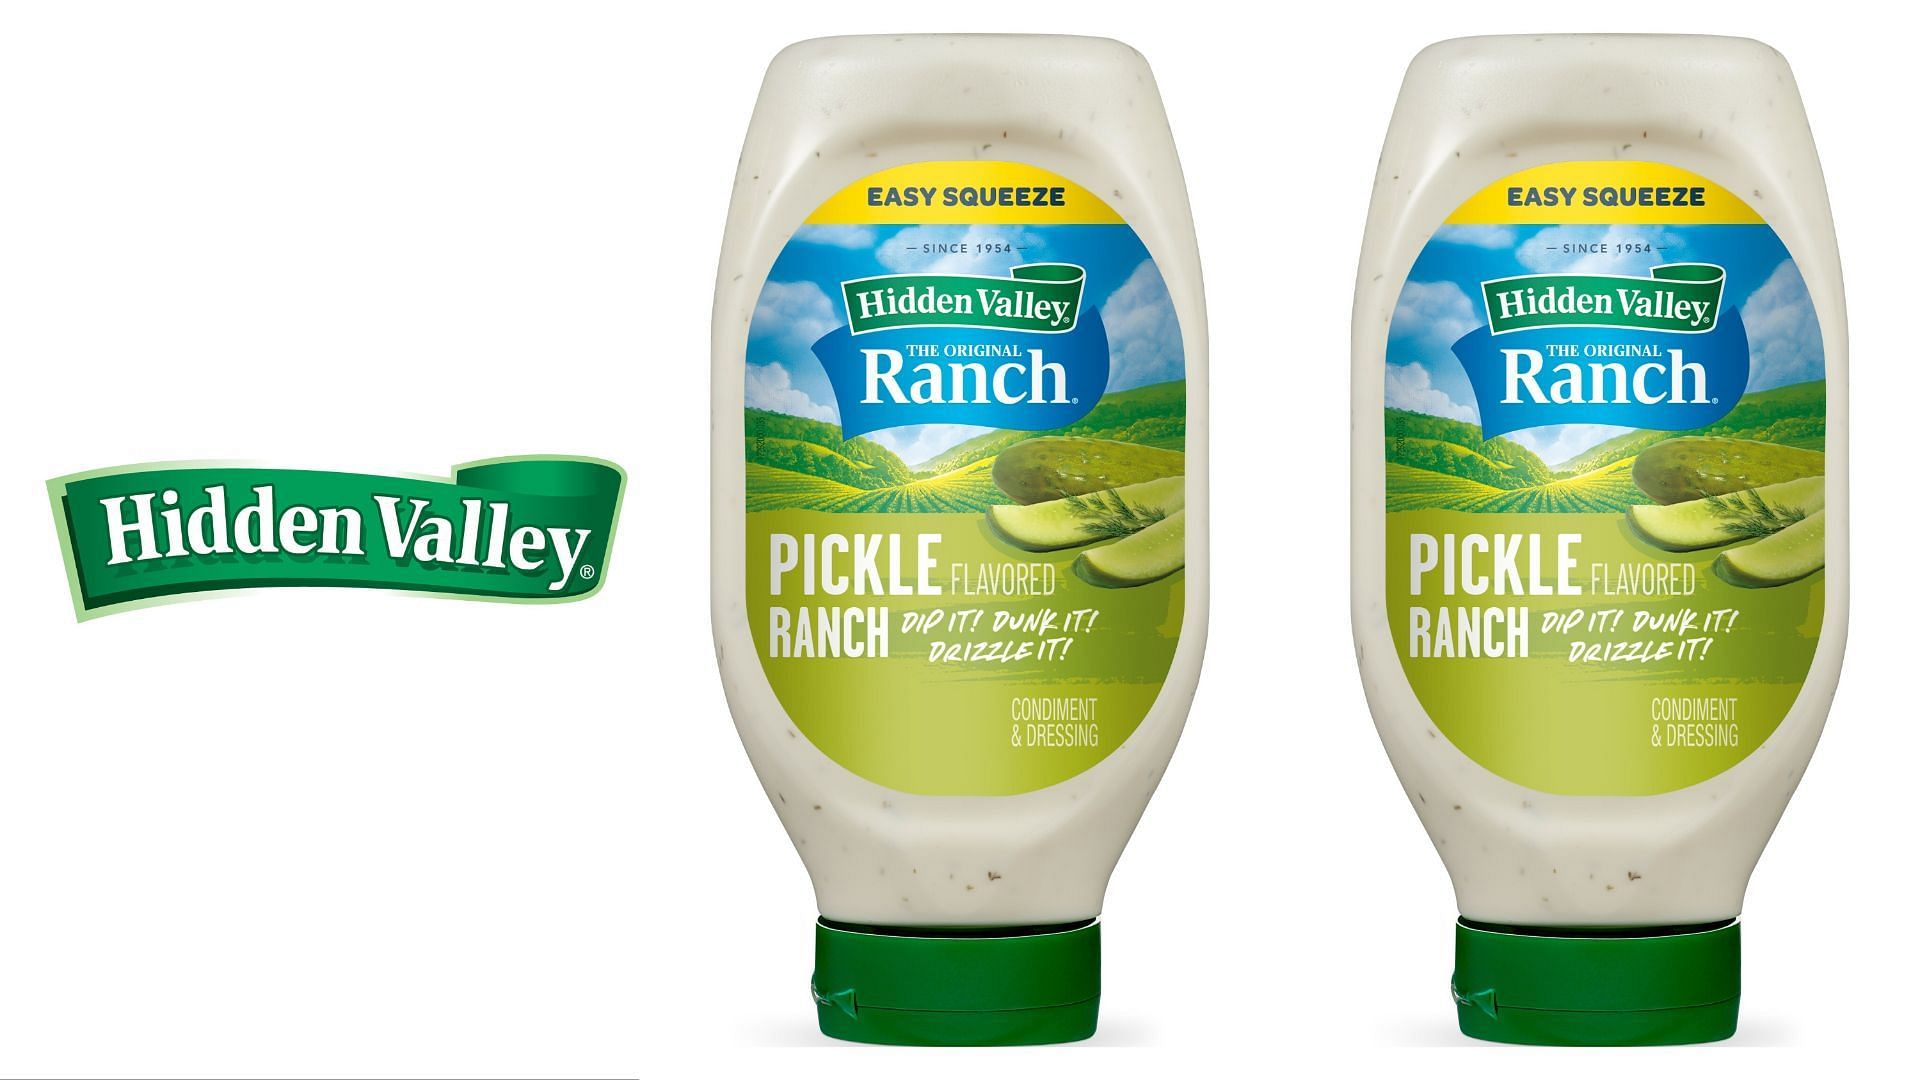 Hidden Valley introduces the new Dill Pickle-Flavored Ranch (Image via Hidden Valley/PR Newswire)